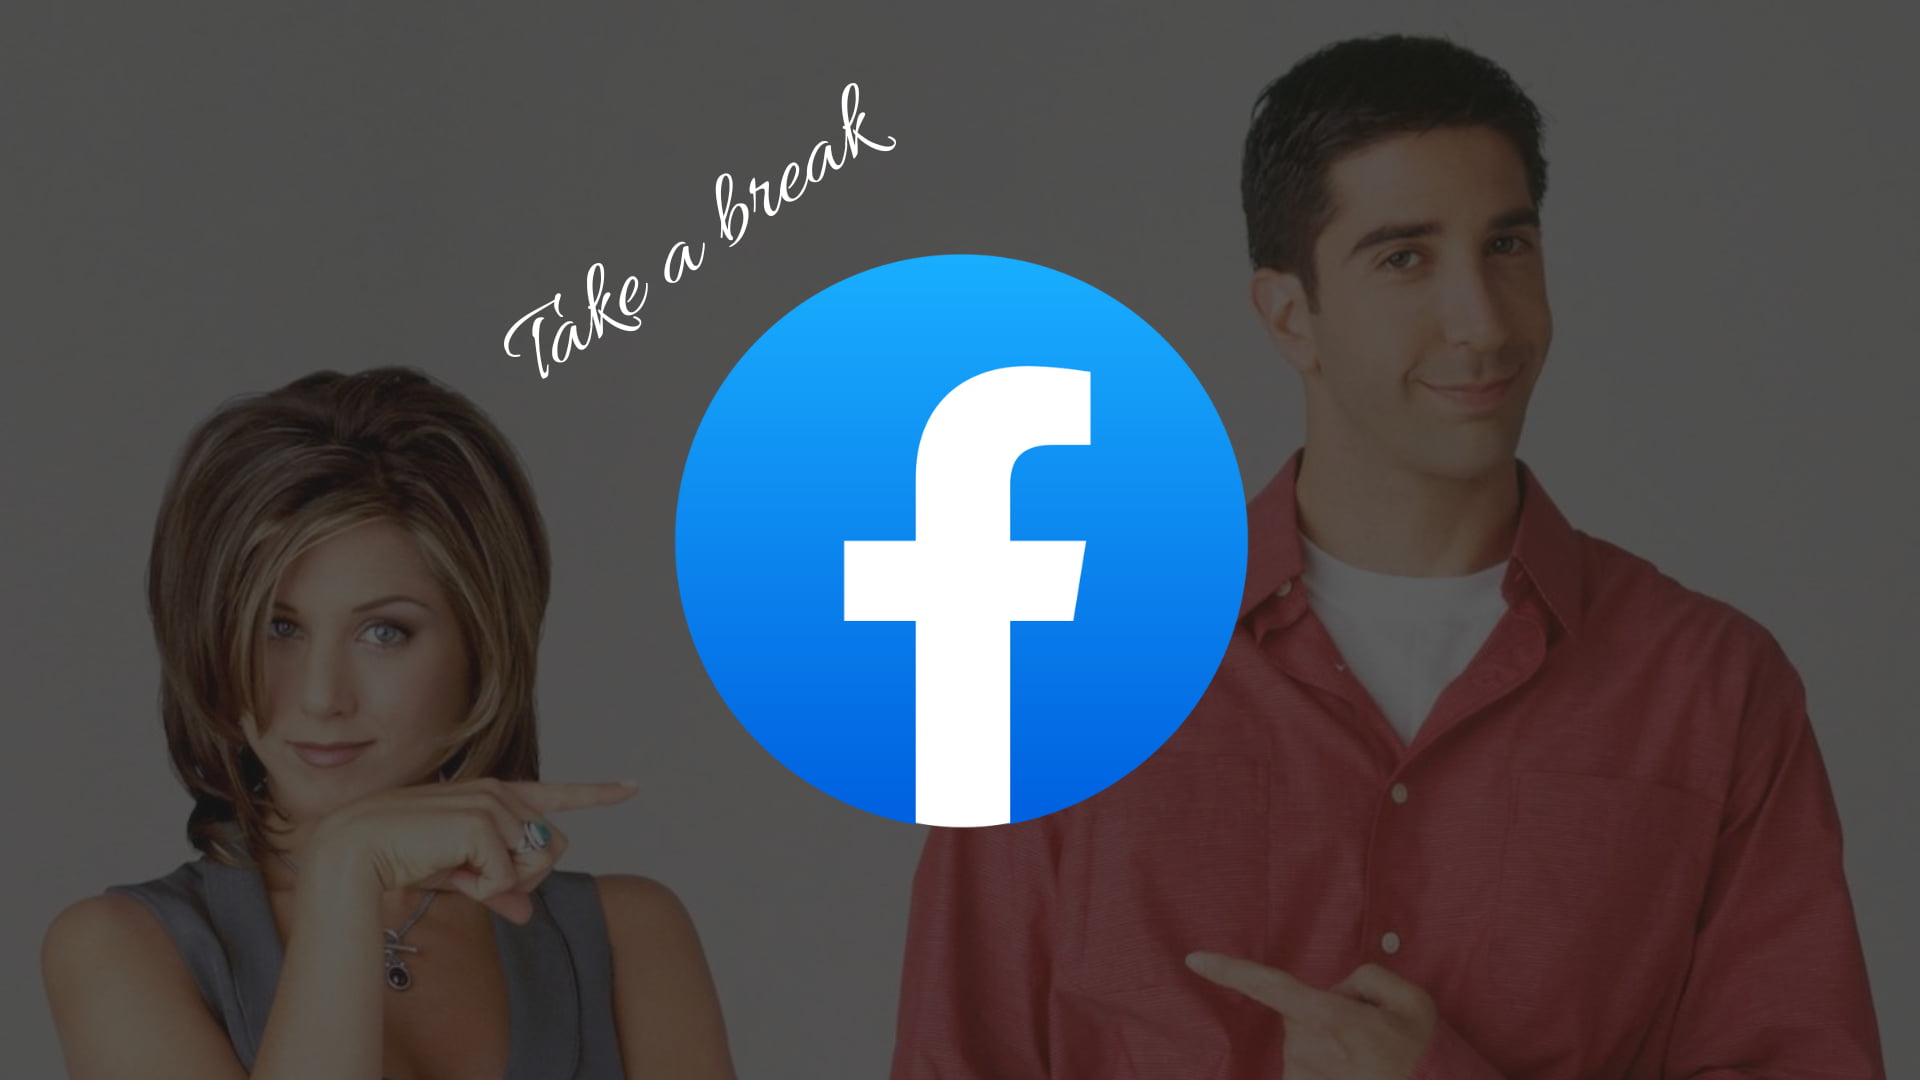 Composition with Facebook logo and the text "Take a break" with Rachel Green and Ross Geller of the famous TV show Friends in the background